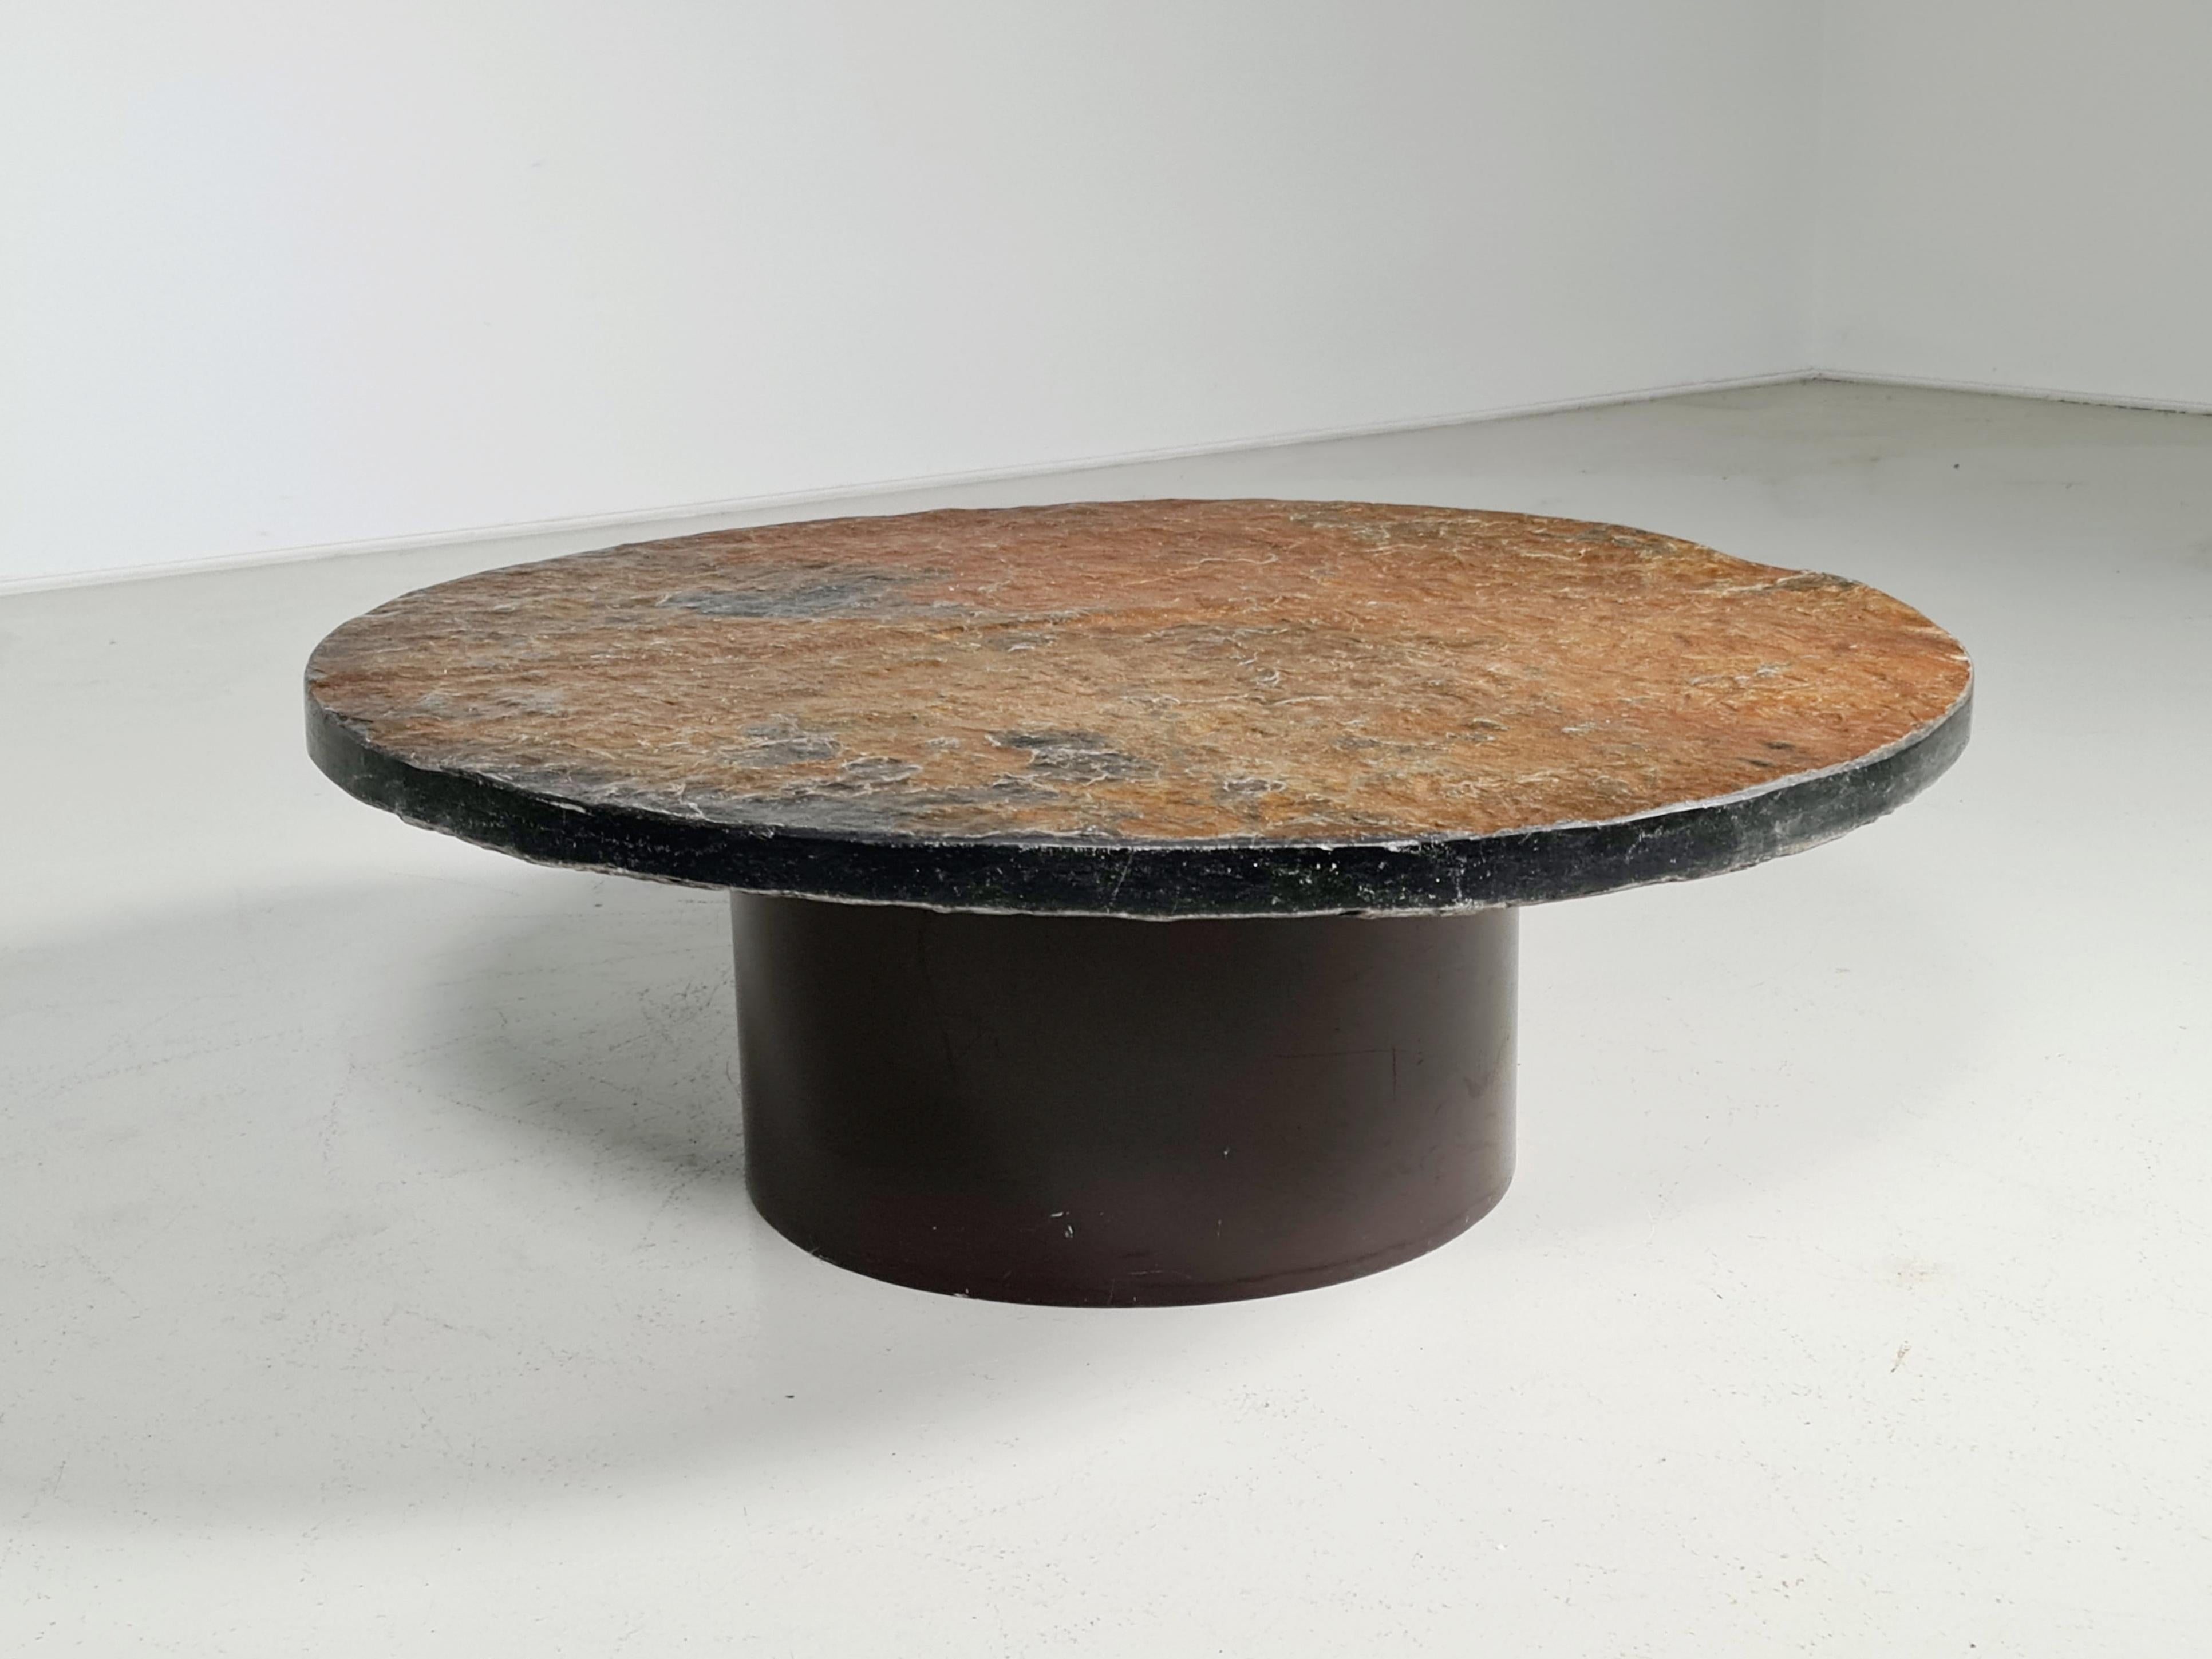 European Brutalist Coffee Table with a Brown/Rusty Slate Top, Netherlands, 1970s